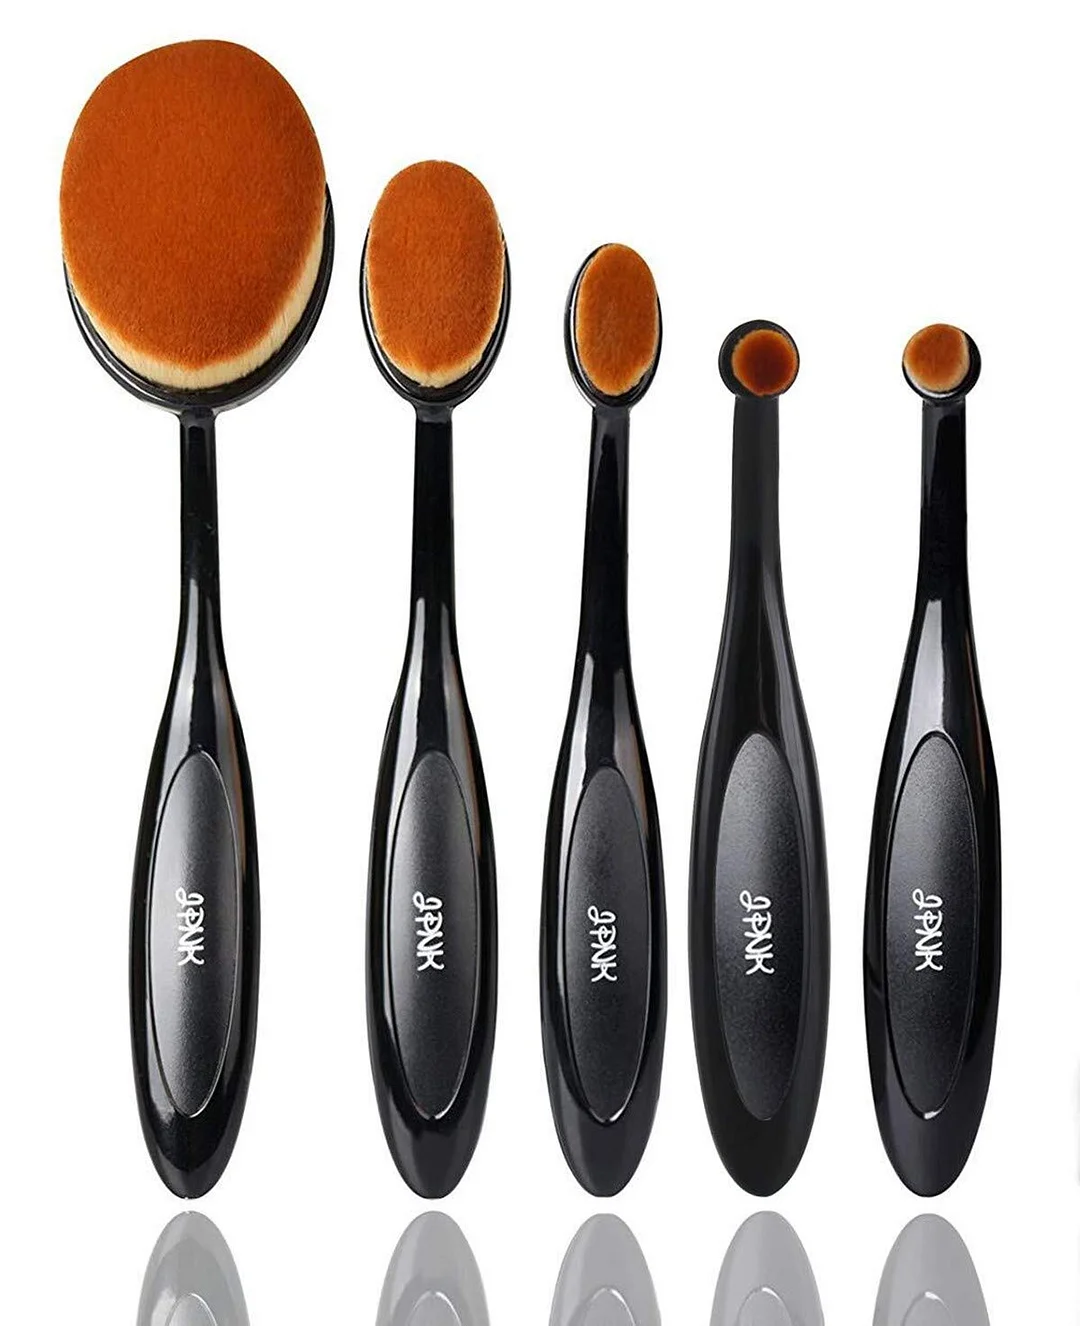 Oval Toothbrush Style Synthetic Powder Foundation Cream Makeup Brush (5 Pieces)